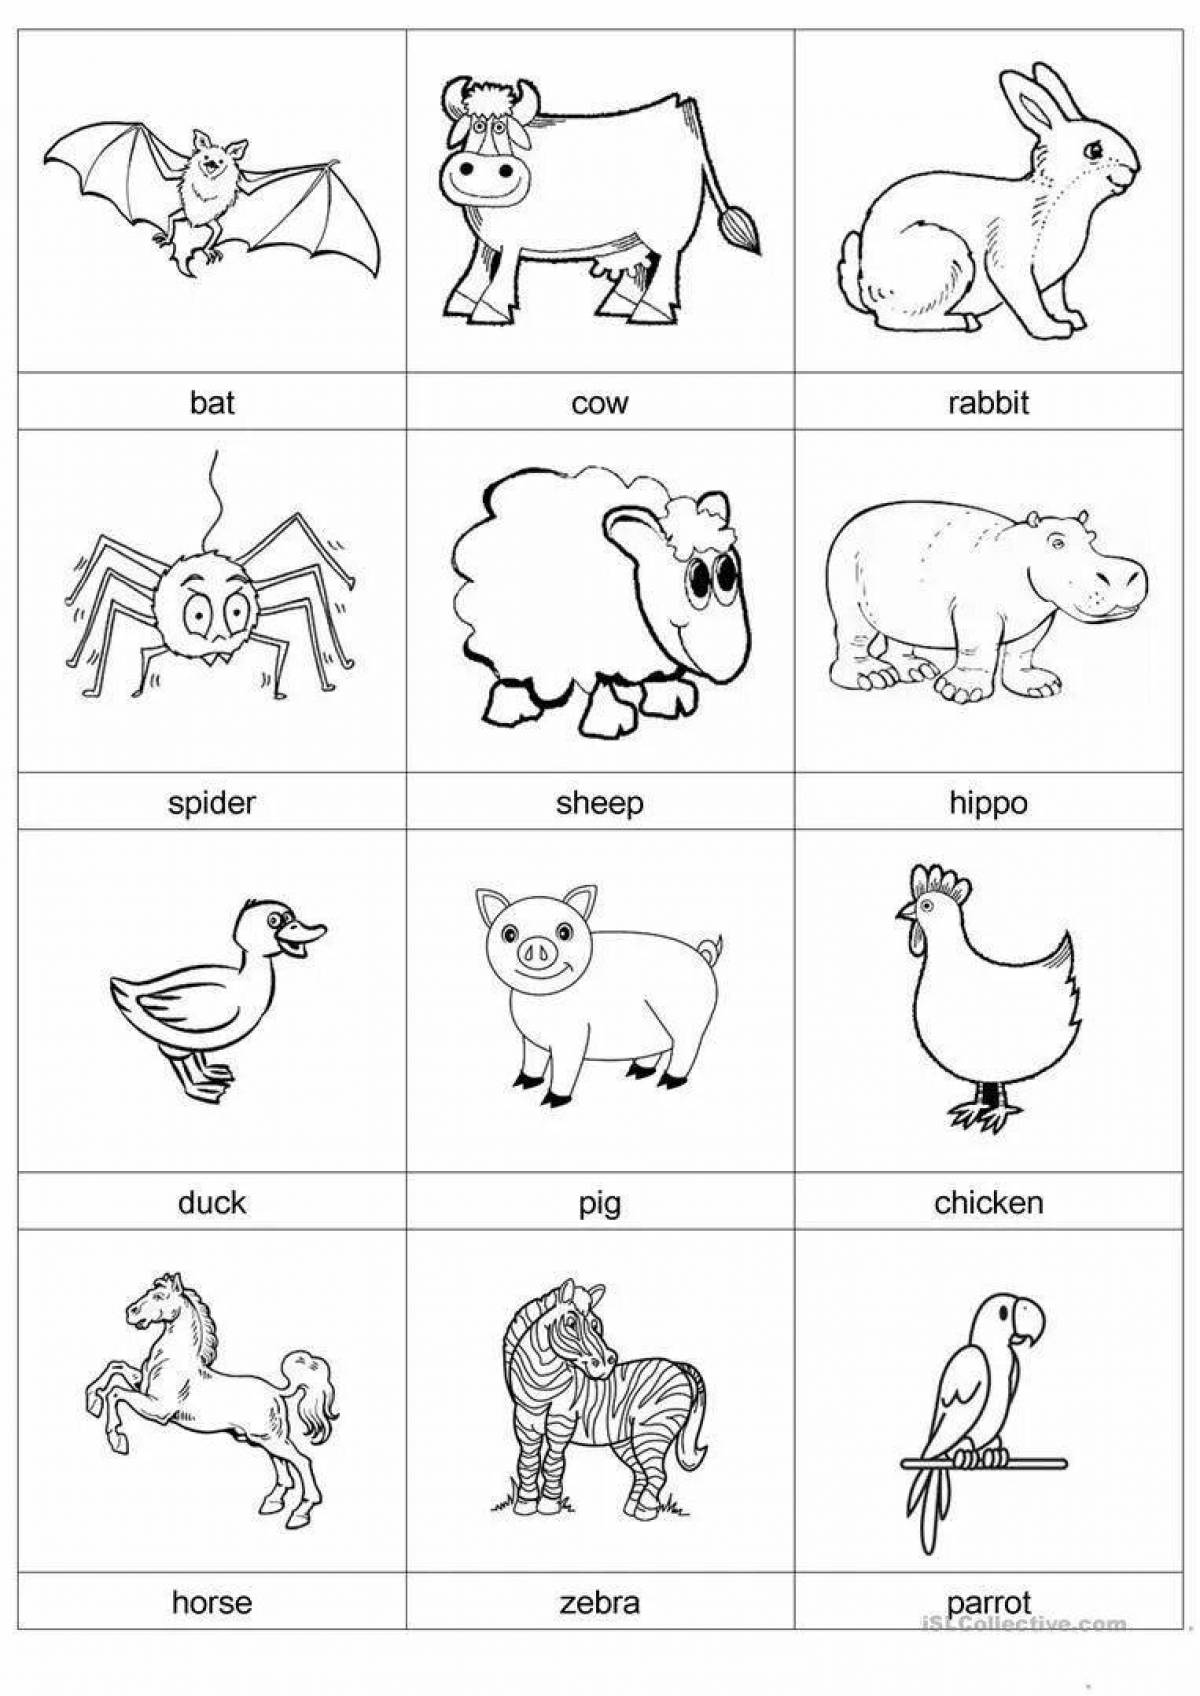 Colorful coloring pages for groups